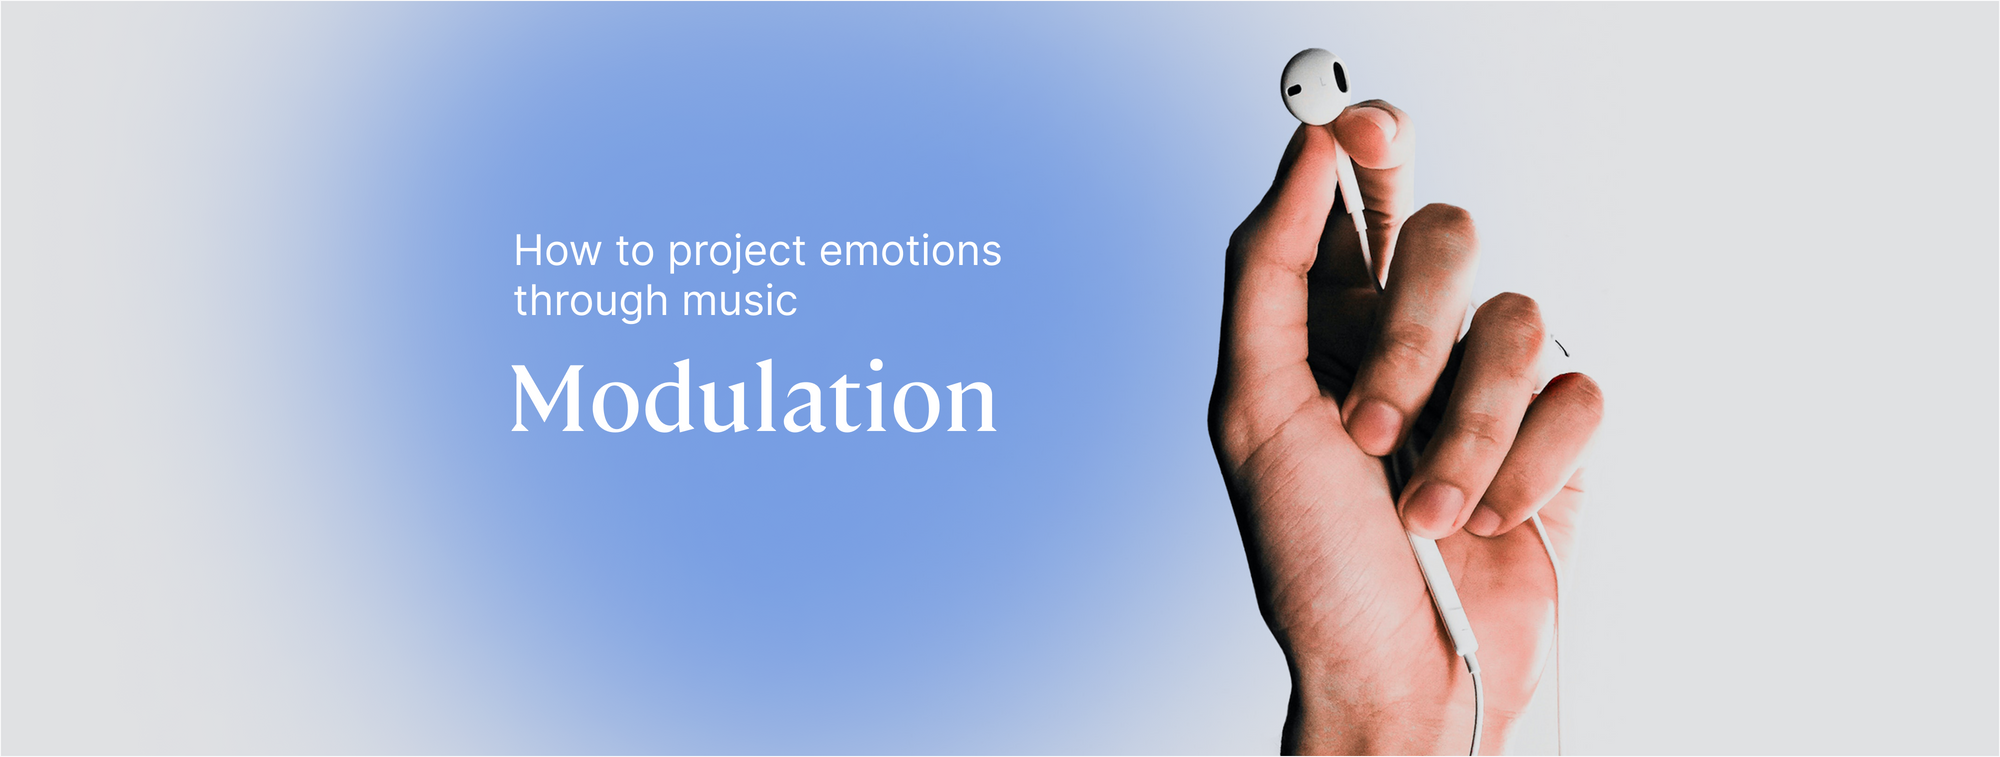 How to project emotions through music: The art of modulation